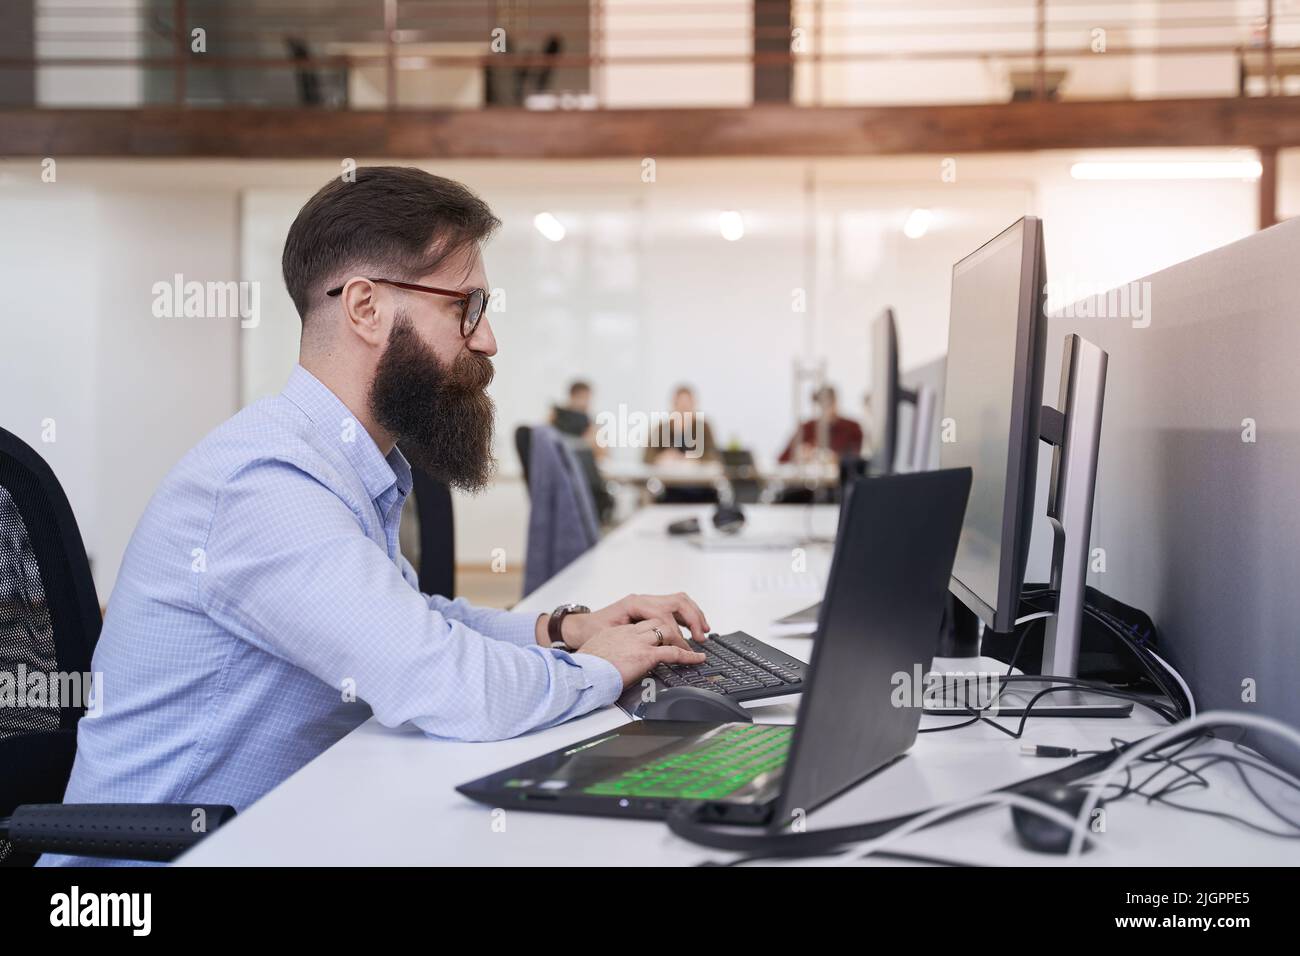 Senior computer programmer developer working in IT office, sitting at desk and coding, working on a project in software development company or startup Stock Photo